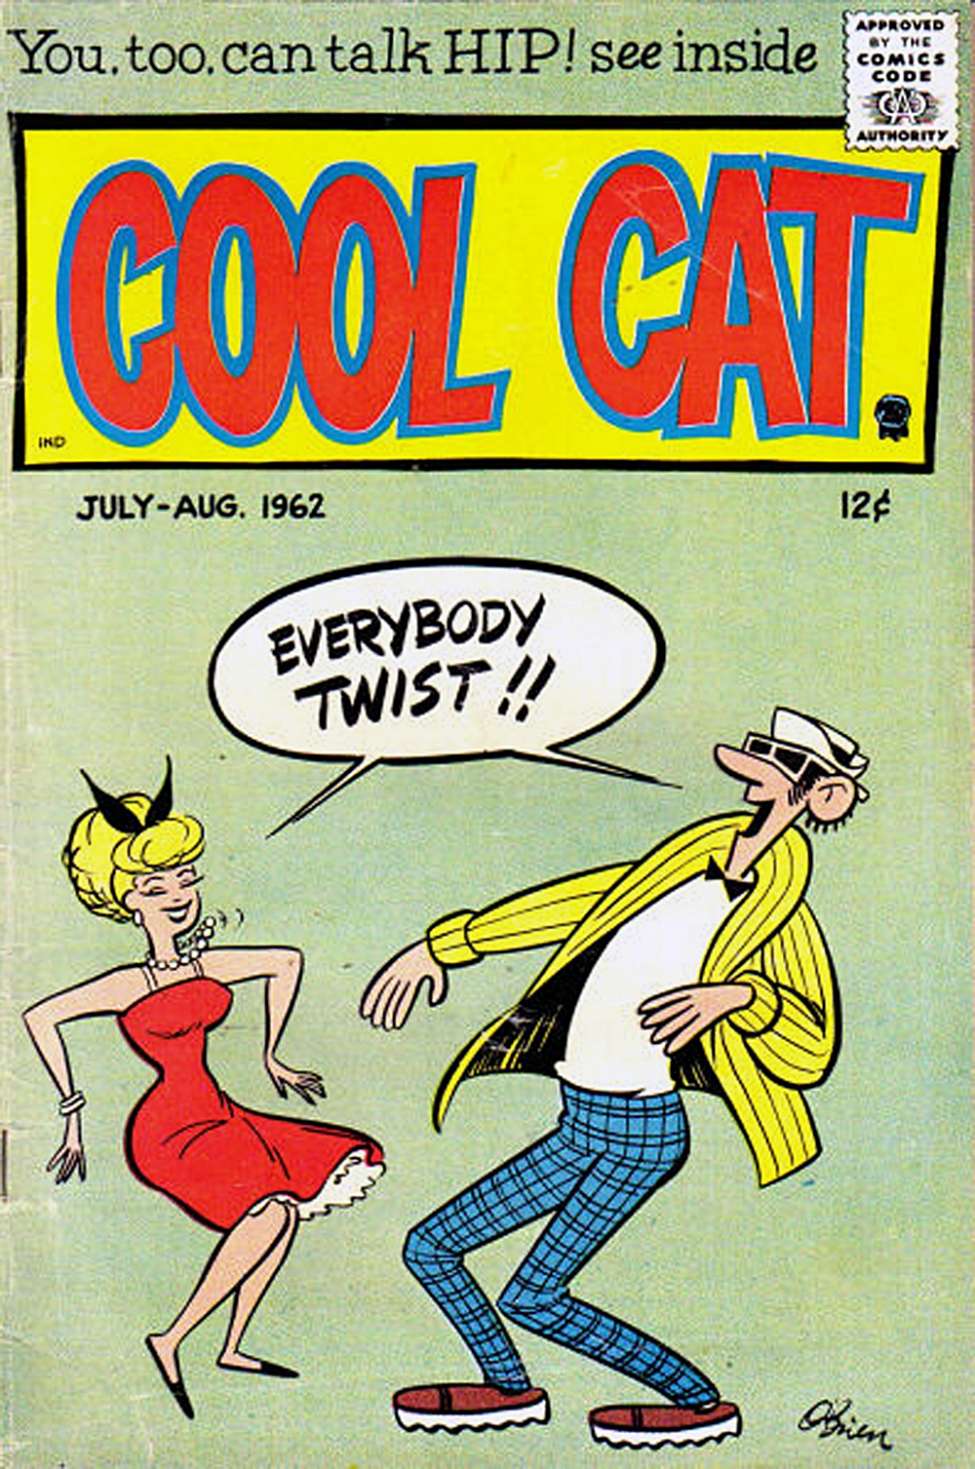 Book Cover For Cool Cat v9 2